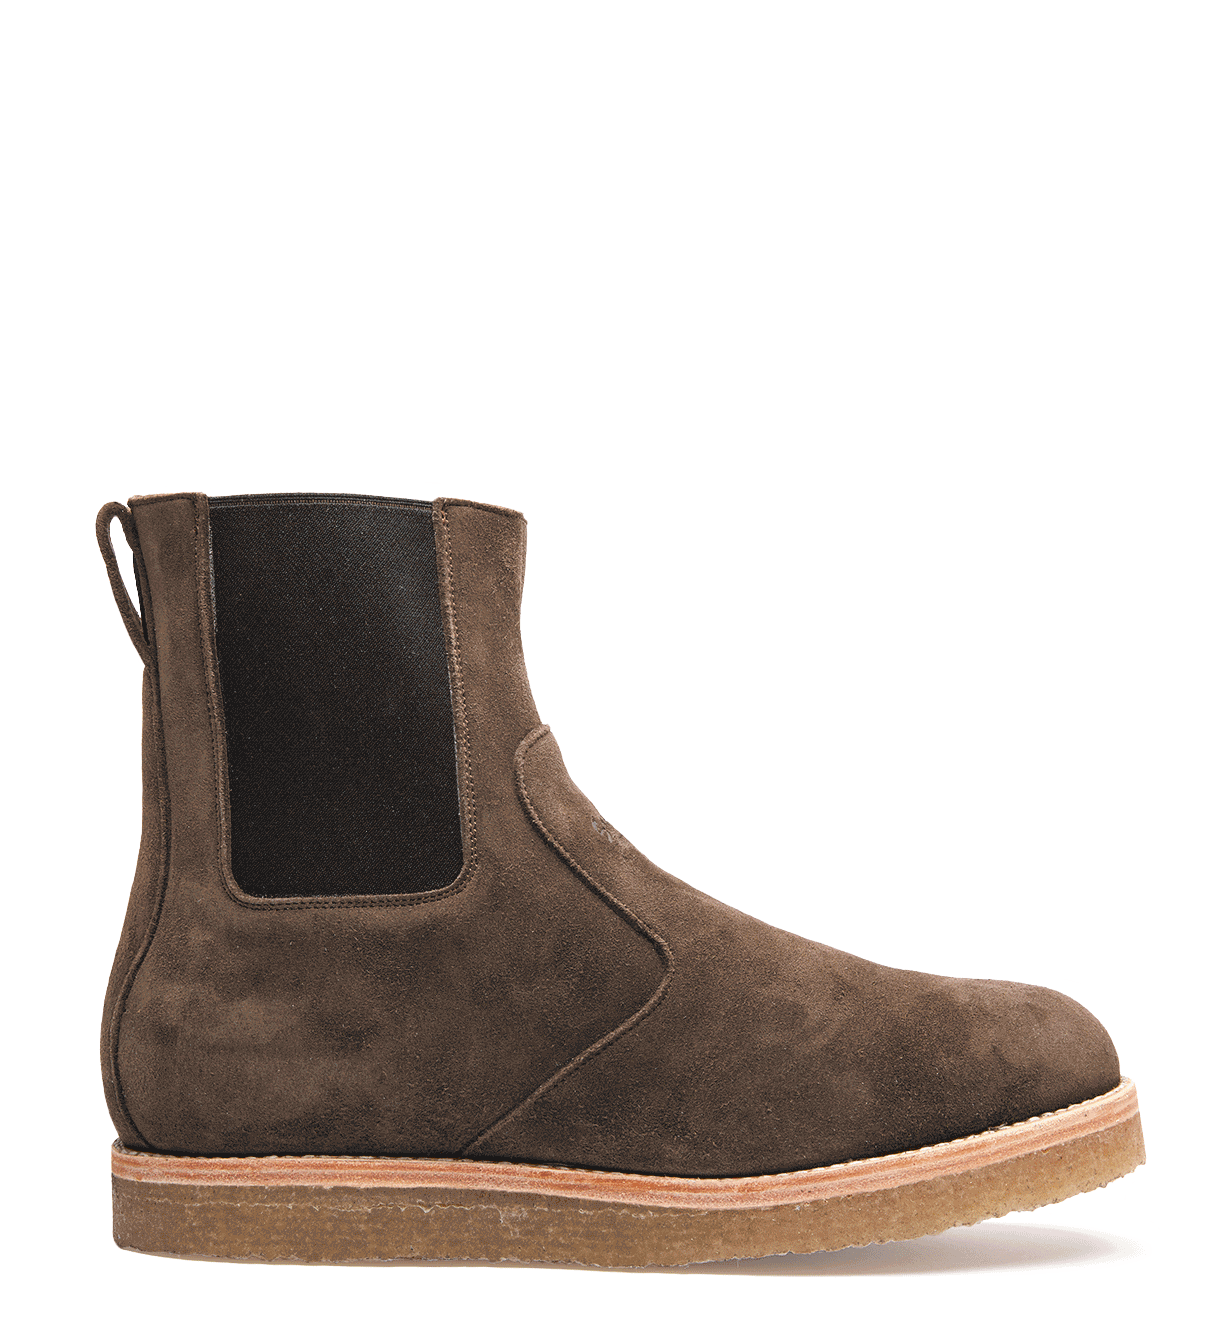 Santa Rosa Brand Stamford Brown suede Chelsea boot on a black background.